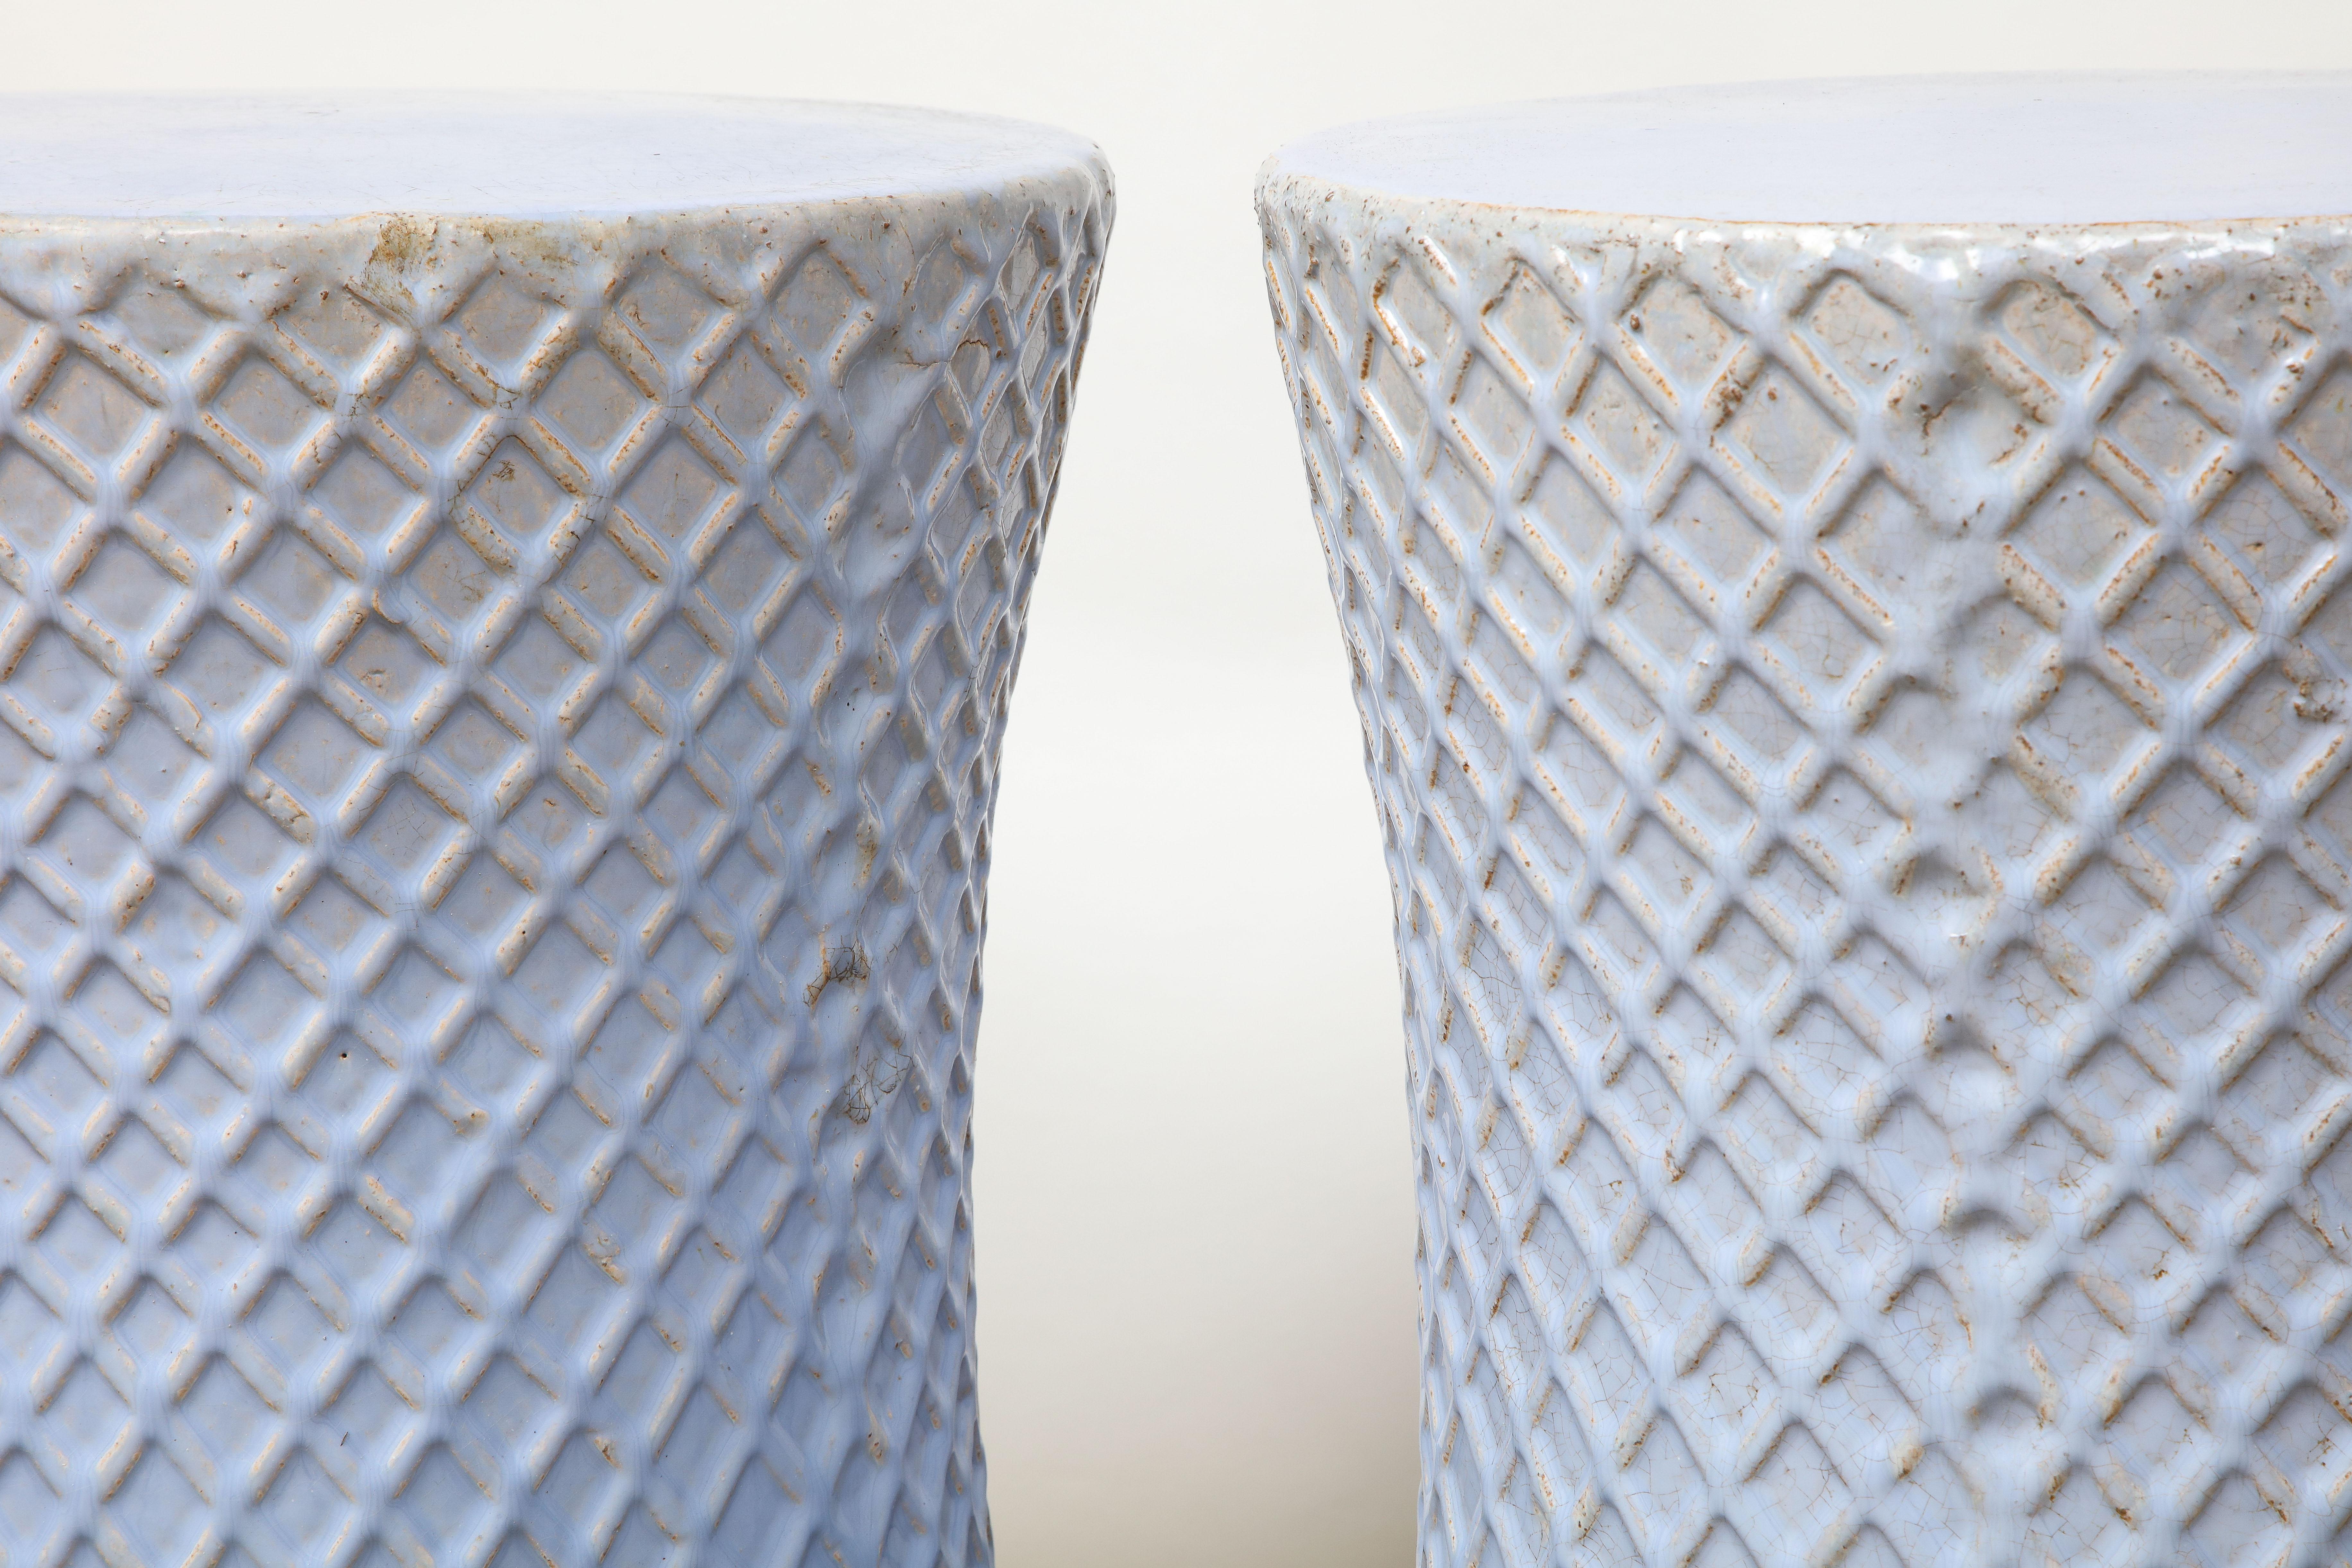 Ceramic garden stools can serve as wonderful accent seats or tables both inside and outdoors. This pair is in a lovely soft blue. While the top is smooth, the side has a textured, diamond pattern. Perfect in the garden or any room in a home.